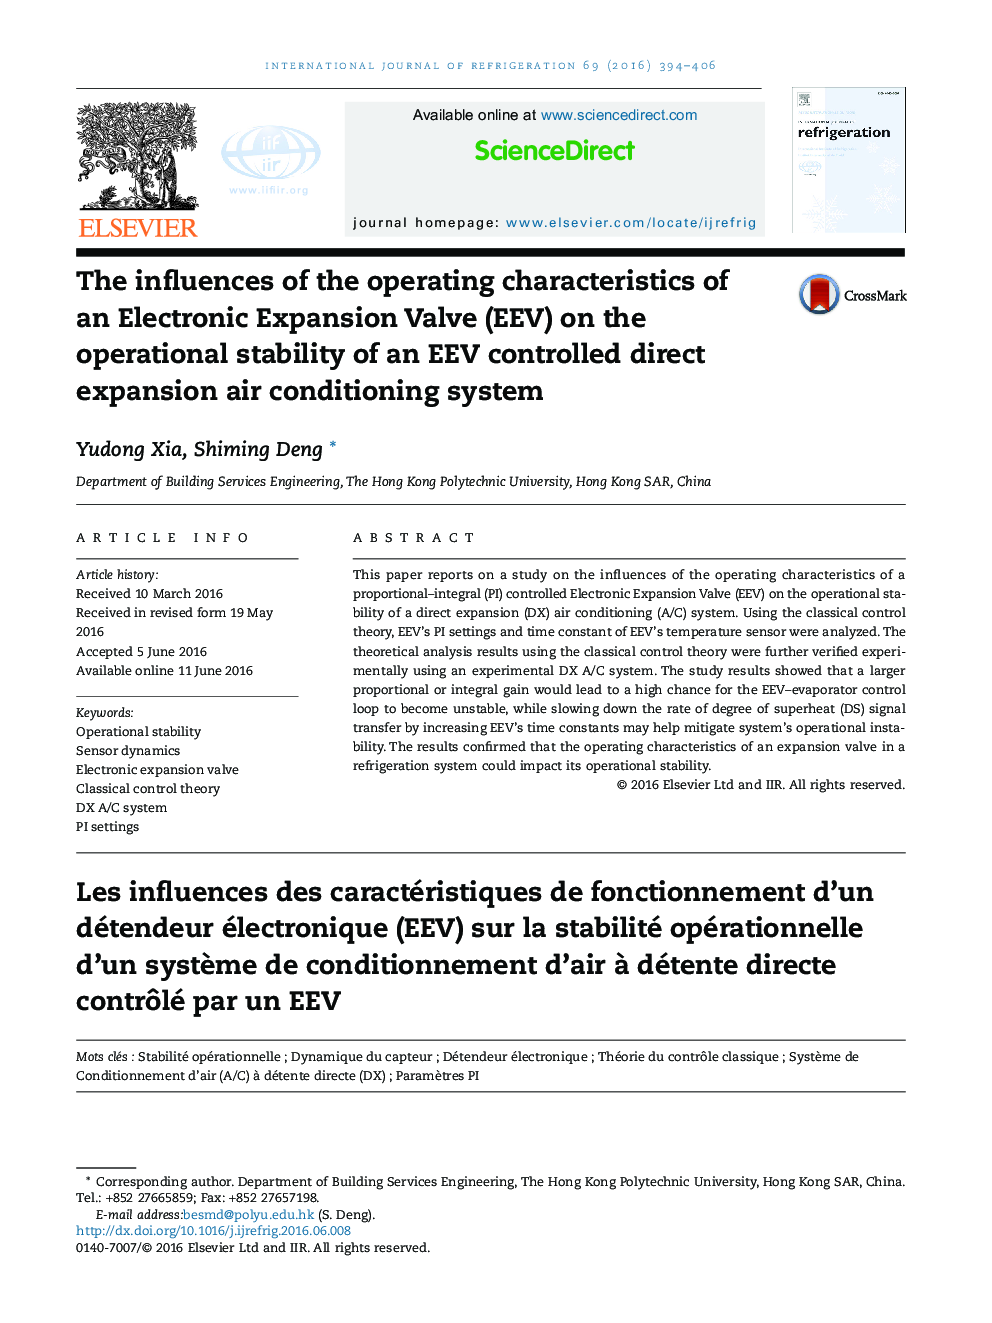 The influences of the operating characteristics of an Electronic Expansion Valve (EEV) on the operational stability of an EEV controlled direct expansion air conditioning system